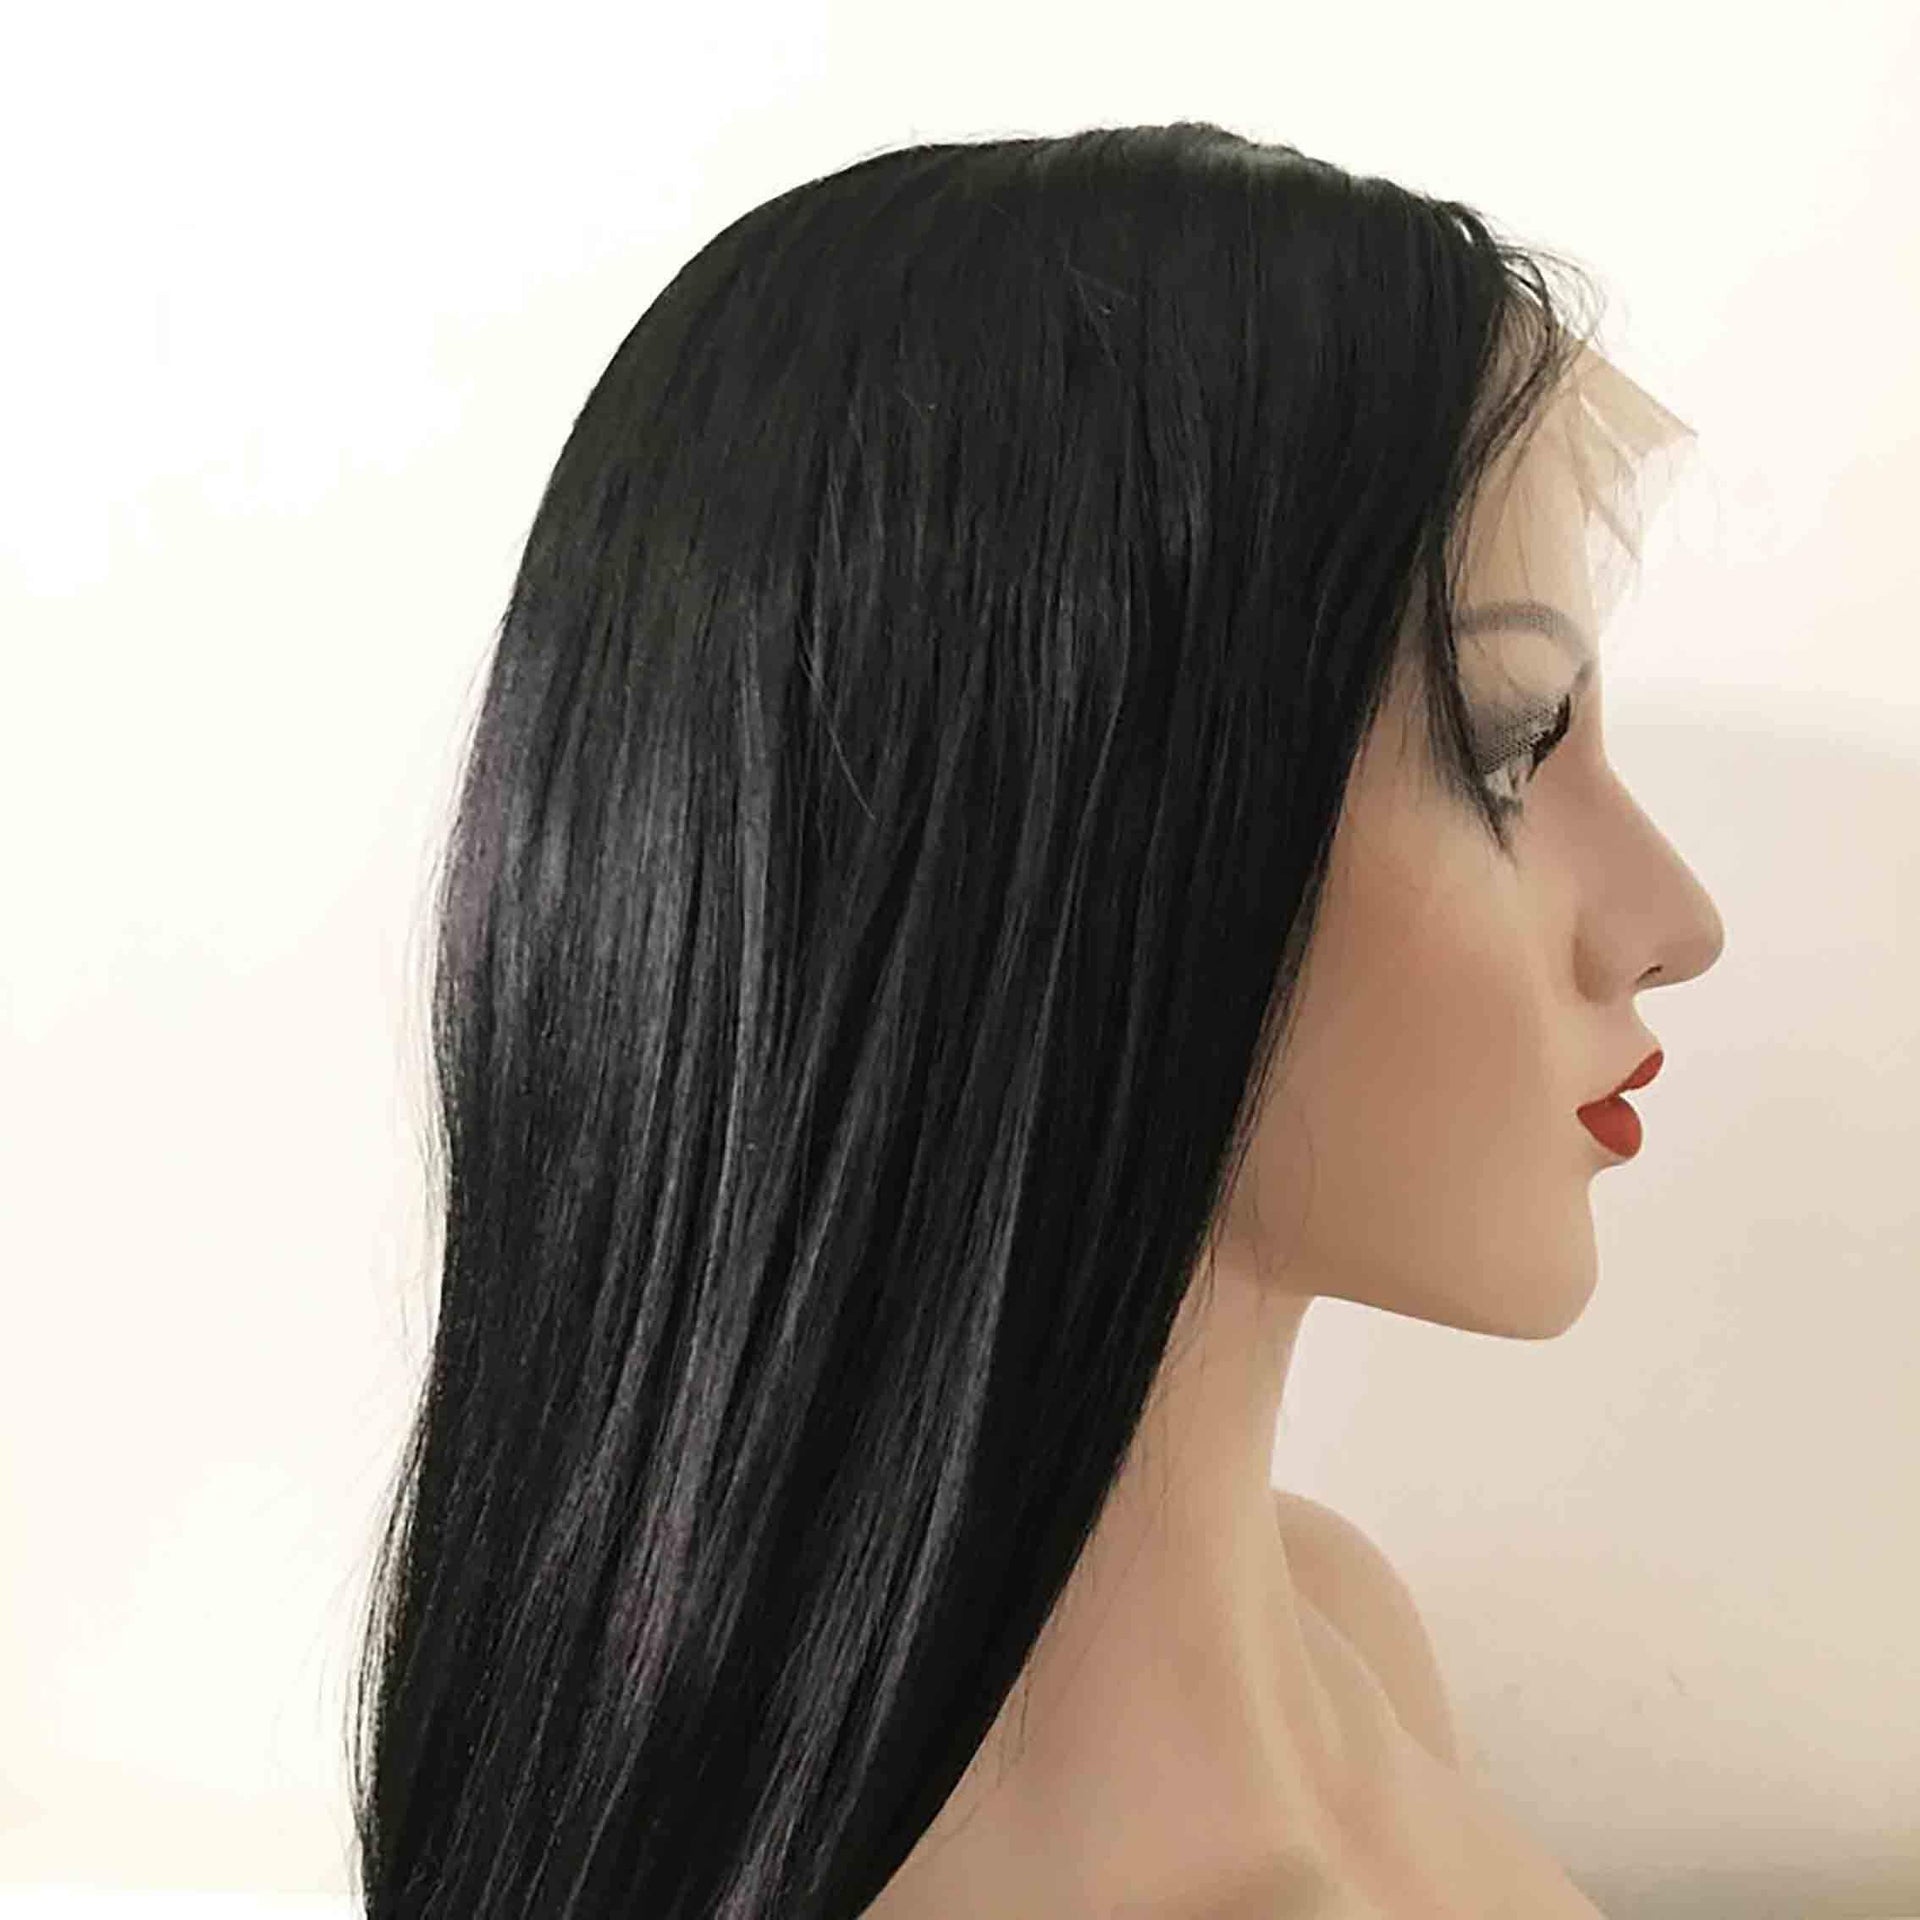 nevermindyrhead Women Black Lace Front Long Straight Pre-plucked Middle Part Wig